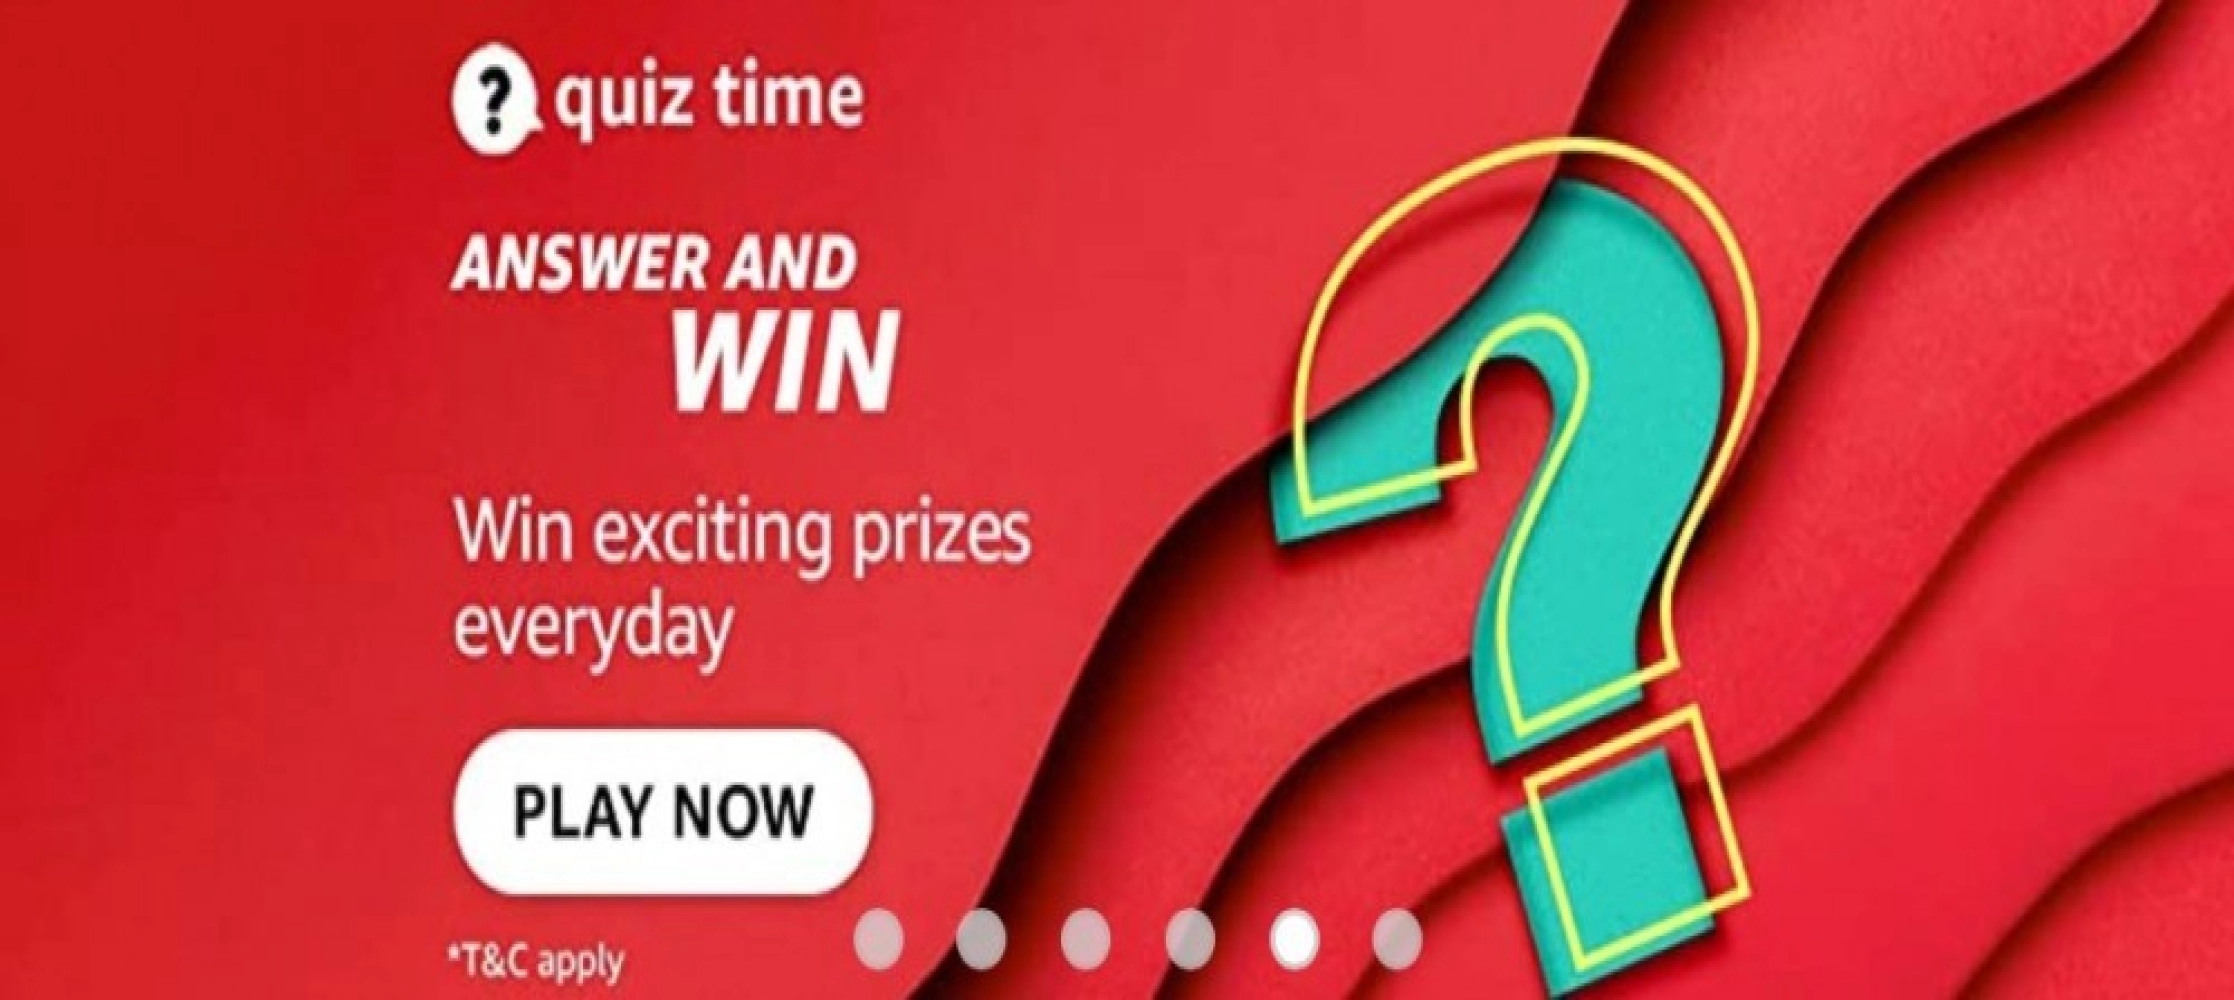 AMAZON QUIZ CONTEST: 9 MAY, 2022 - ANSWER TODAY FOR THE QUESTIONS AND GET A CHANCE TO WIN AMAZON PAY RS.25,000